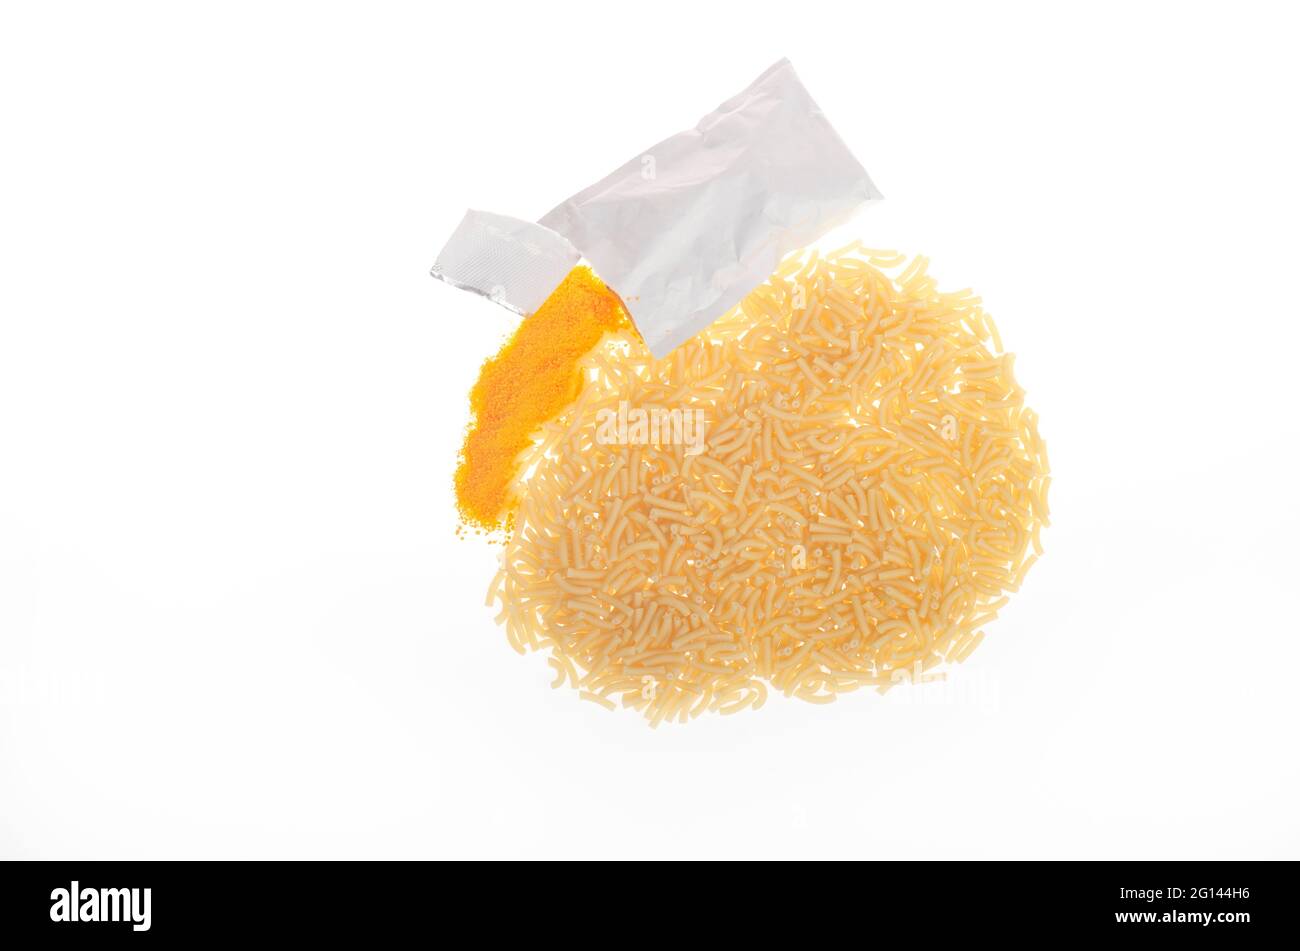 Macaroni & Cheese package mix on white showing elbow pasta and packet of cheese mix Stock Photo